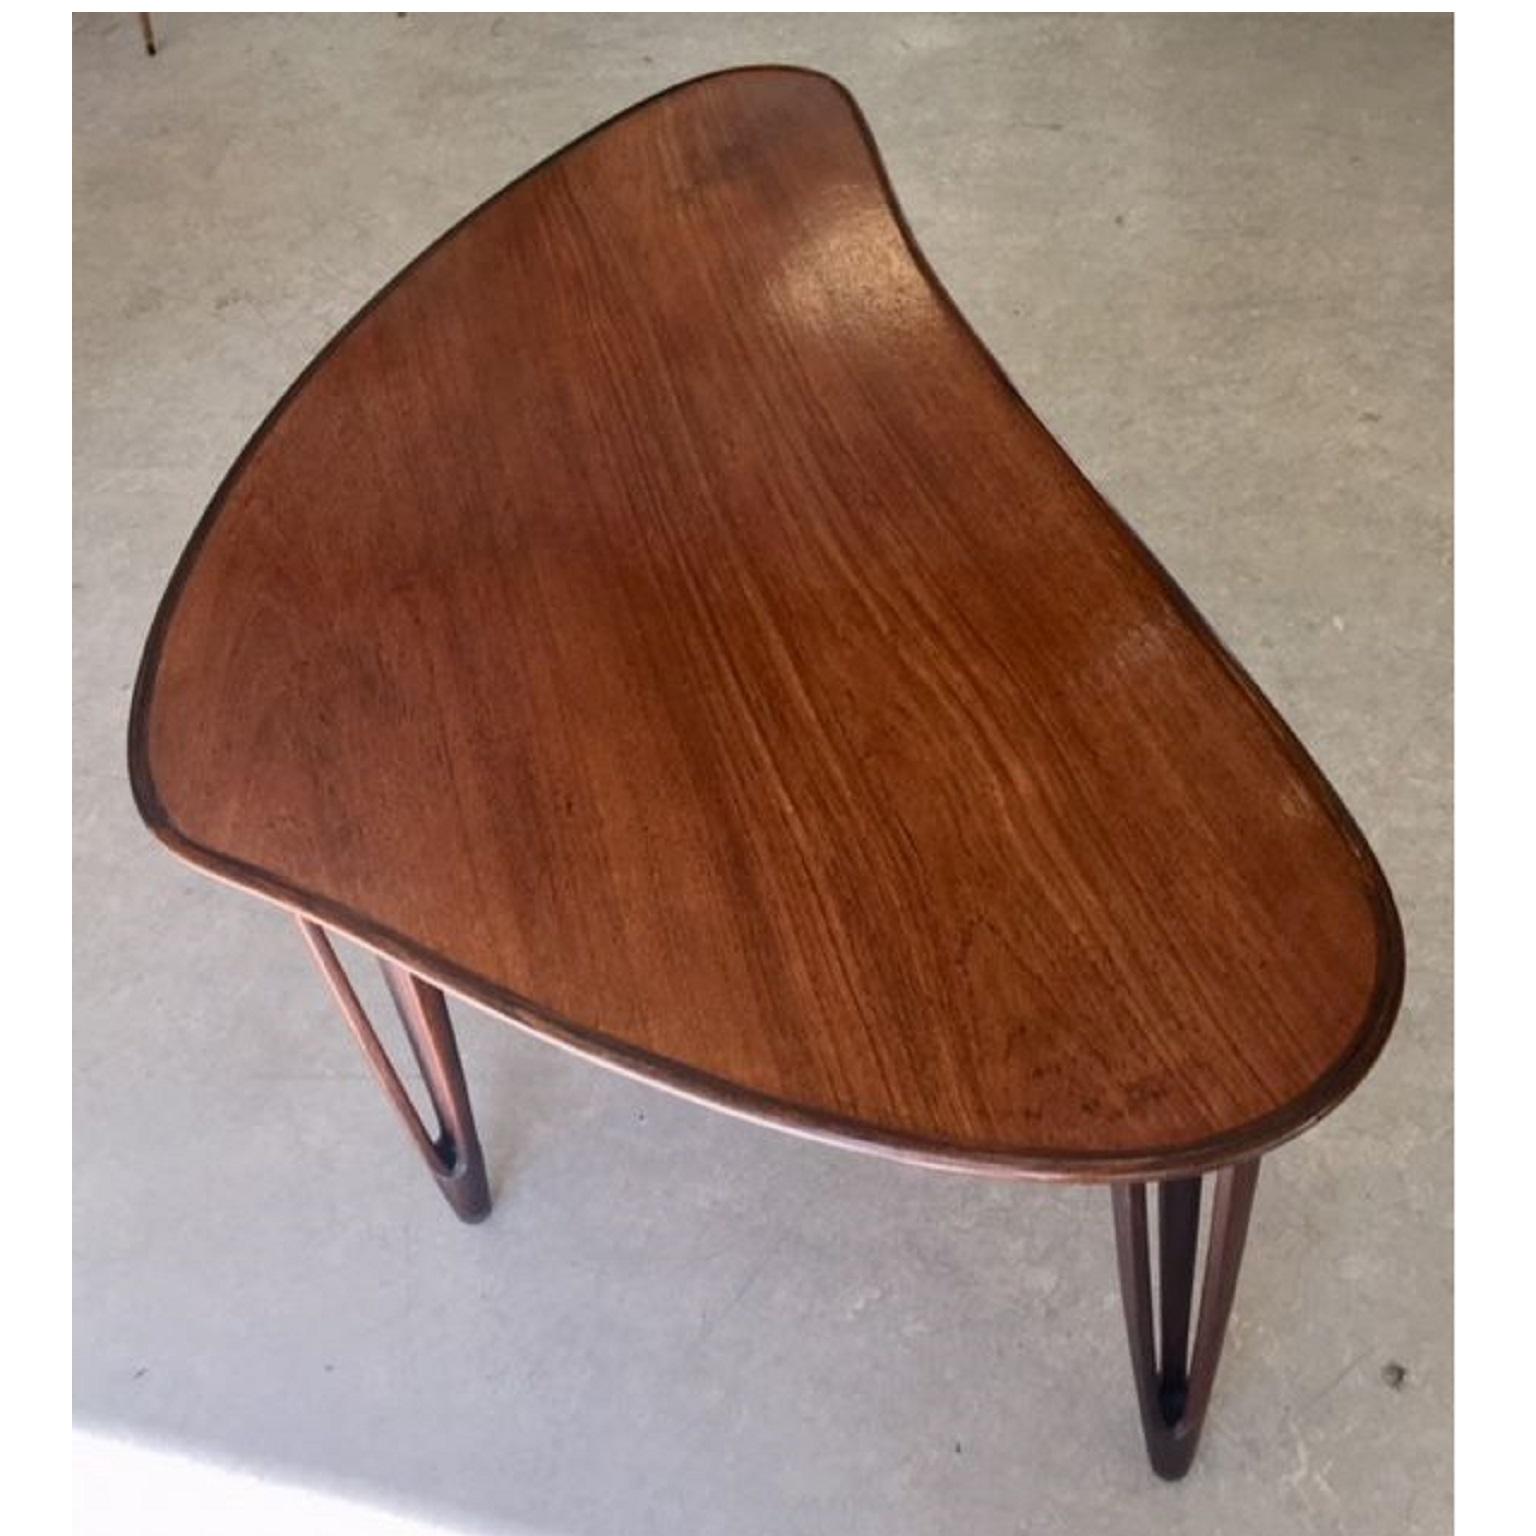 Danish Mid-Century Modern biomorphic coffee / lounge table in teak produced by BC Møbler in the 1950s. The soft, biomorphic triangular shape top features a contrasting raised lip. The table is supported by three trident shaped legs capped in brass.